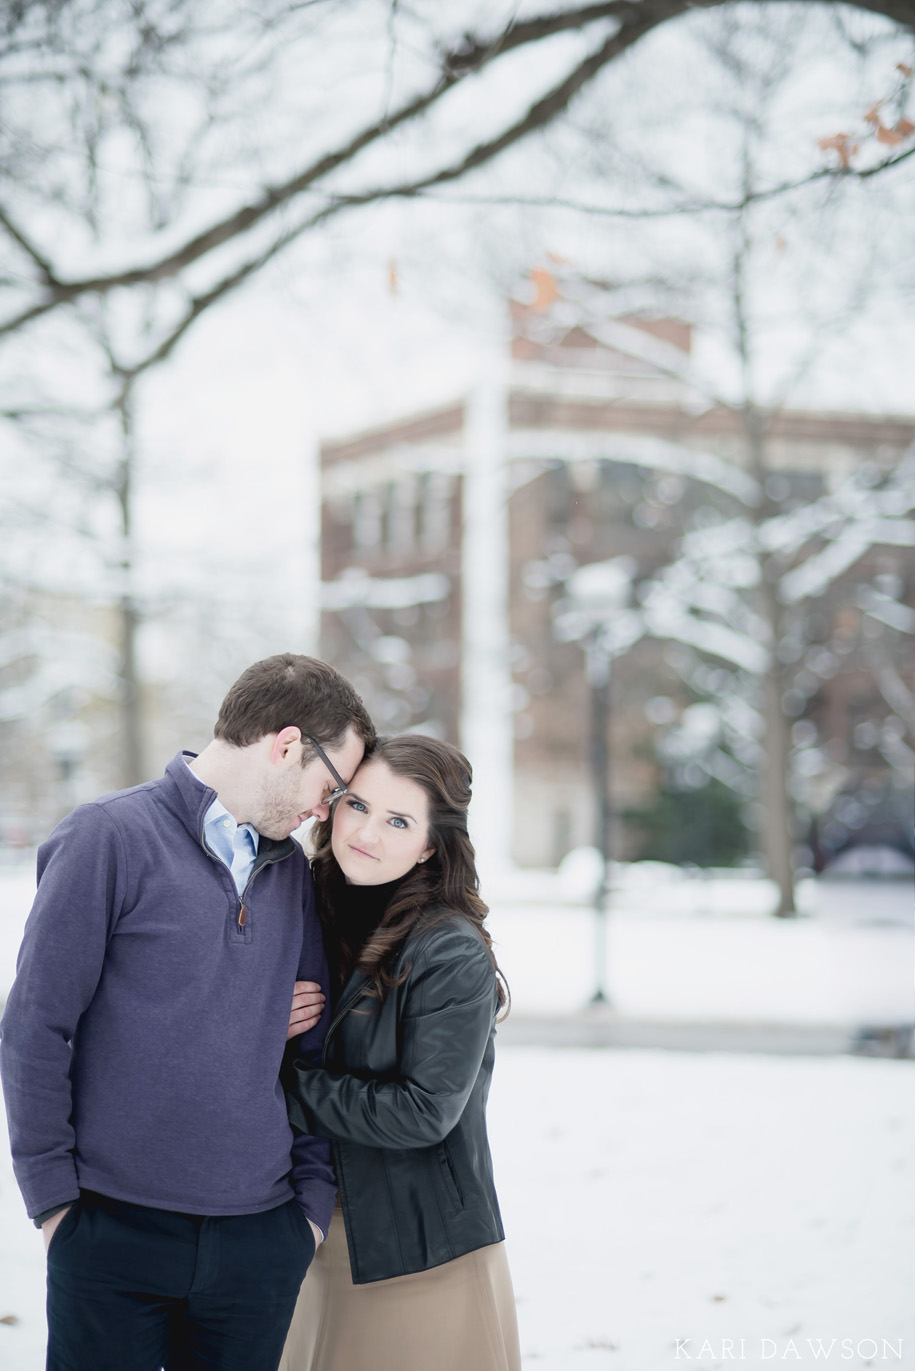 A snowy University of Michigan Campus winter engagement in Ann Arbor Michigan-2